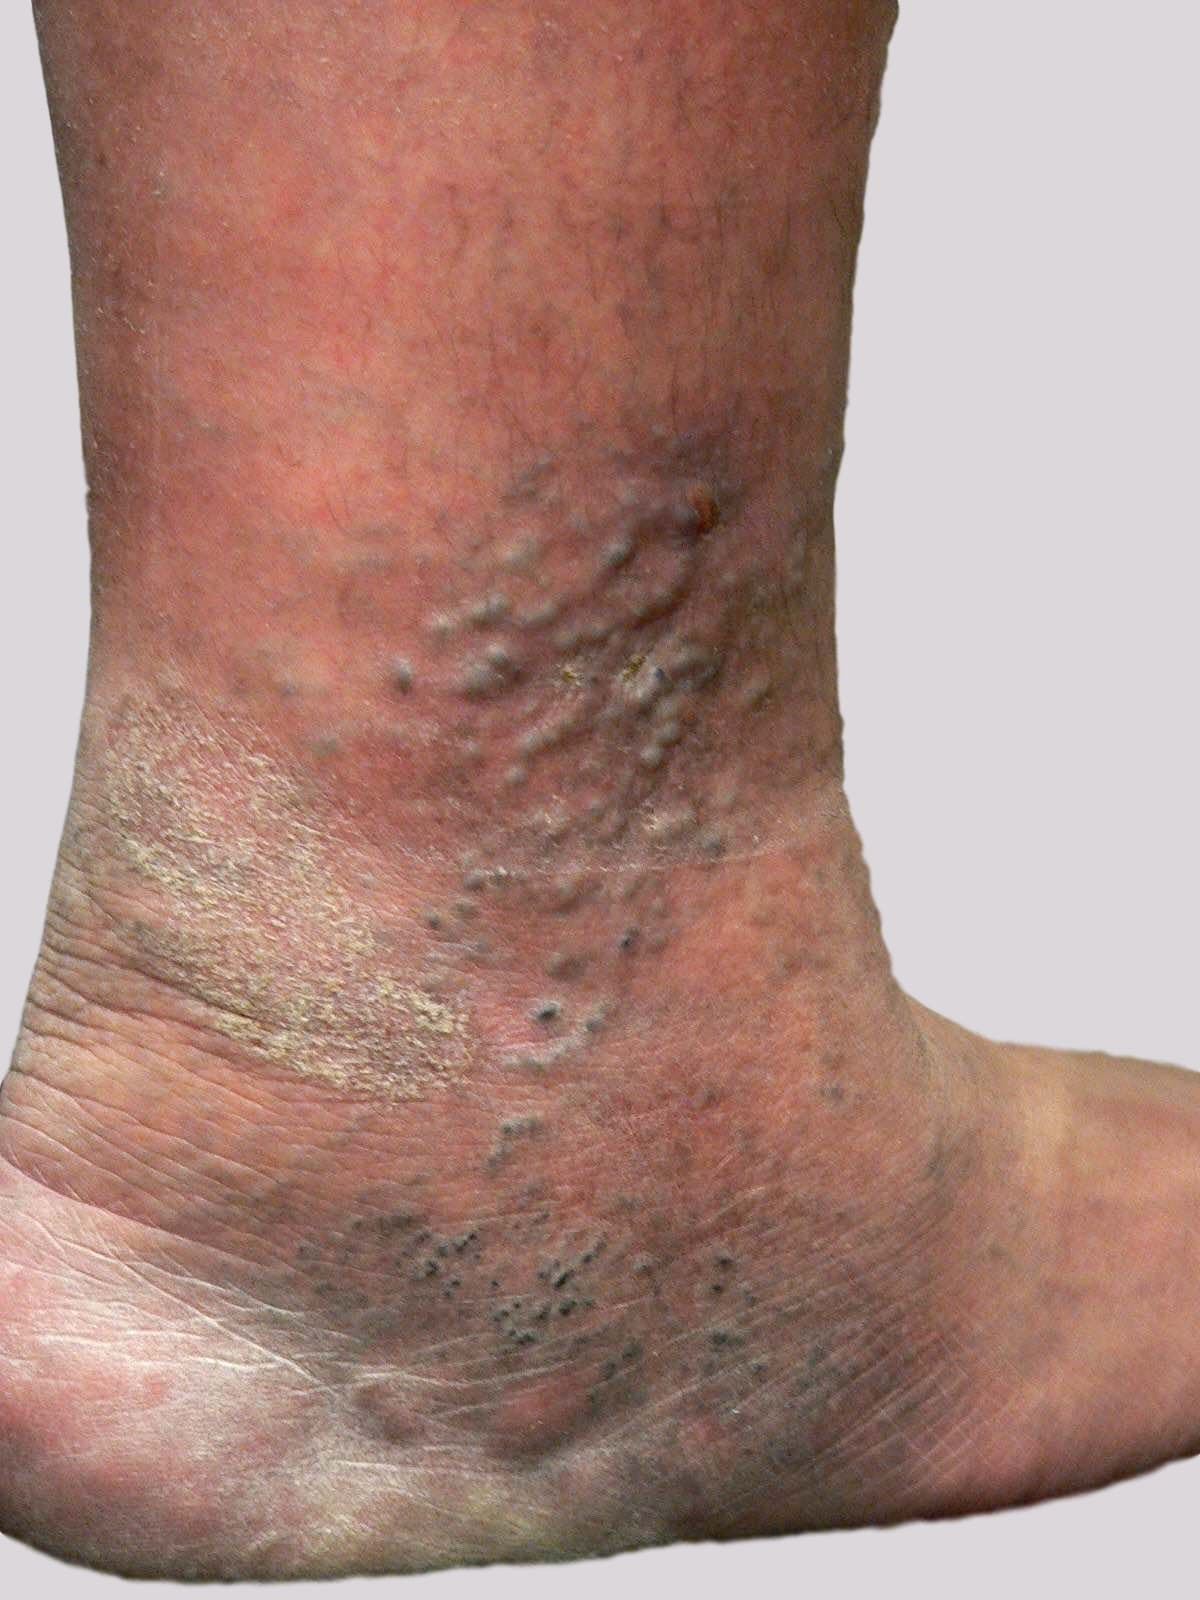 Eczema and varicose veins with very shallow 